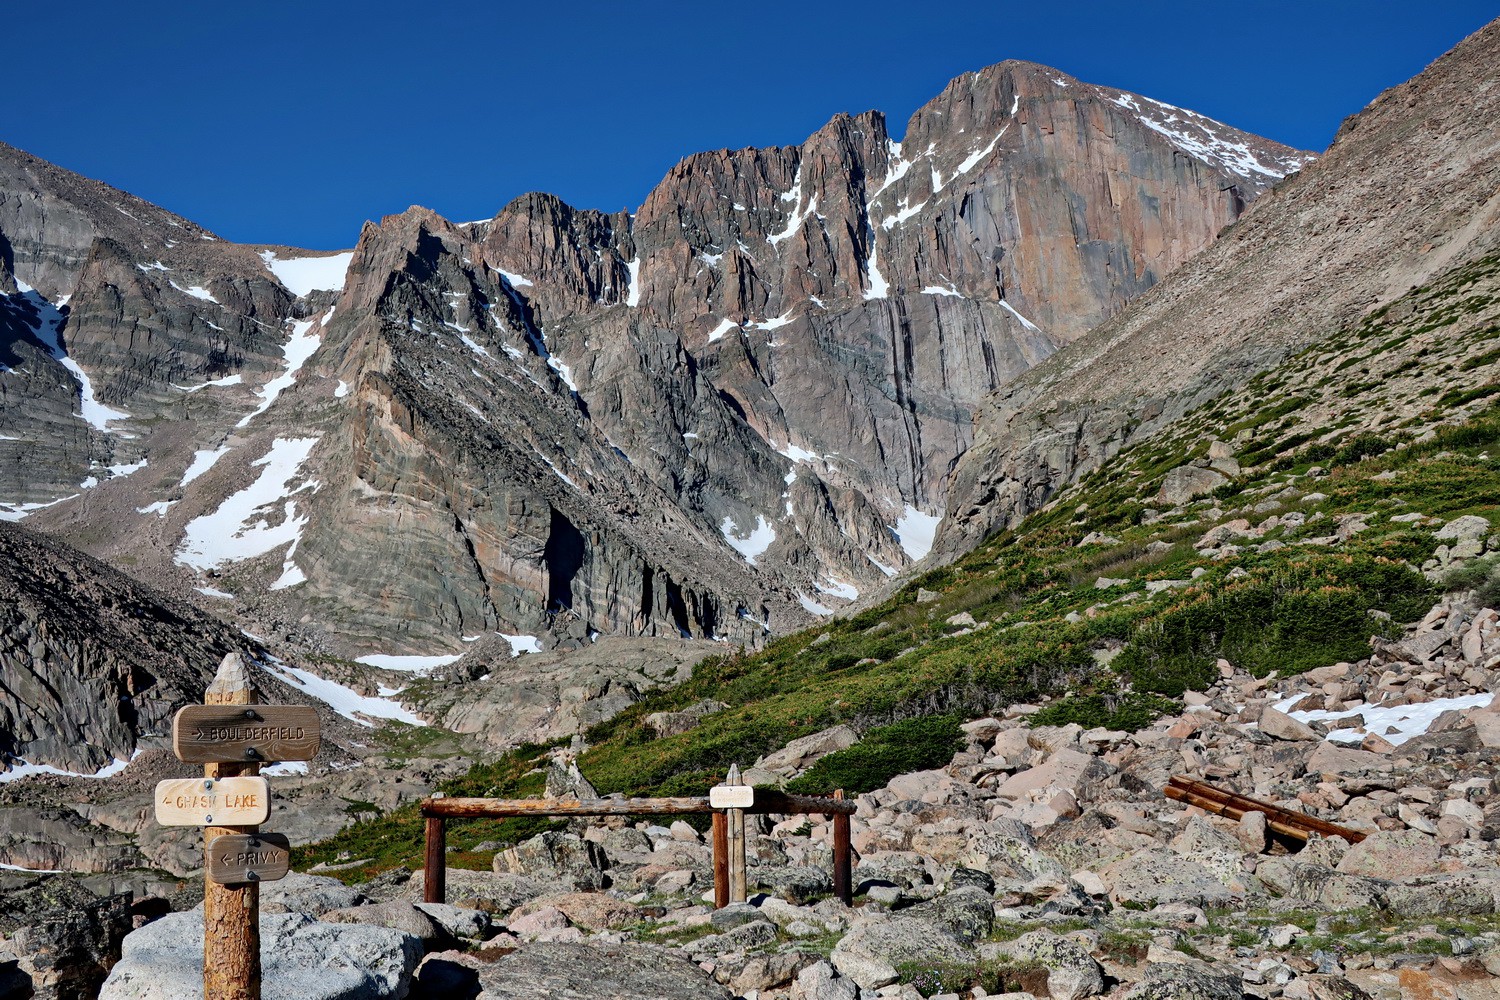 East face of Longs Peak which is with 4346 meters sea-level the highest point in the Rocky Mountains National Park